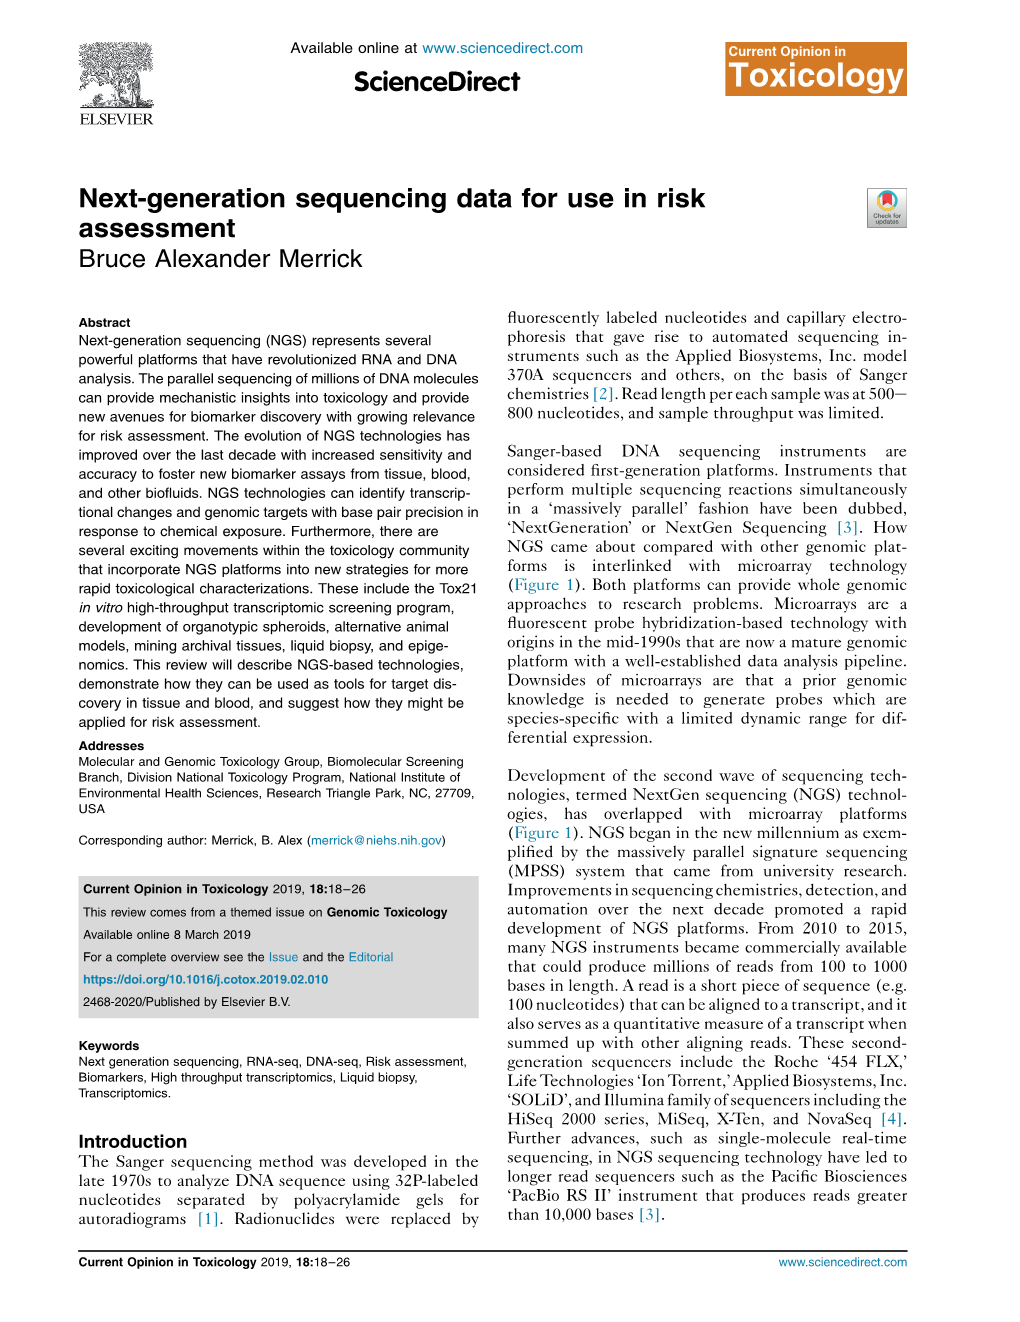 Next-Generation Sequencing Data for Use in Risk Assessment Bruce Alexander Merrick